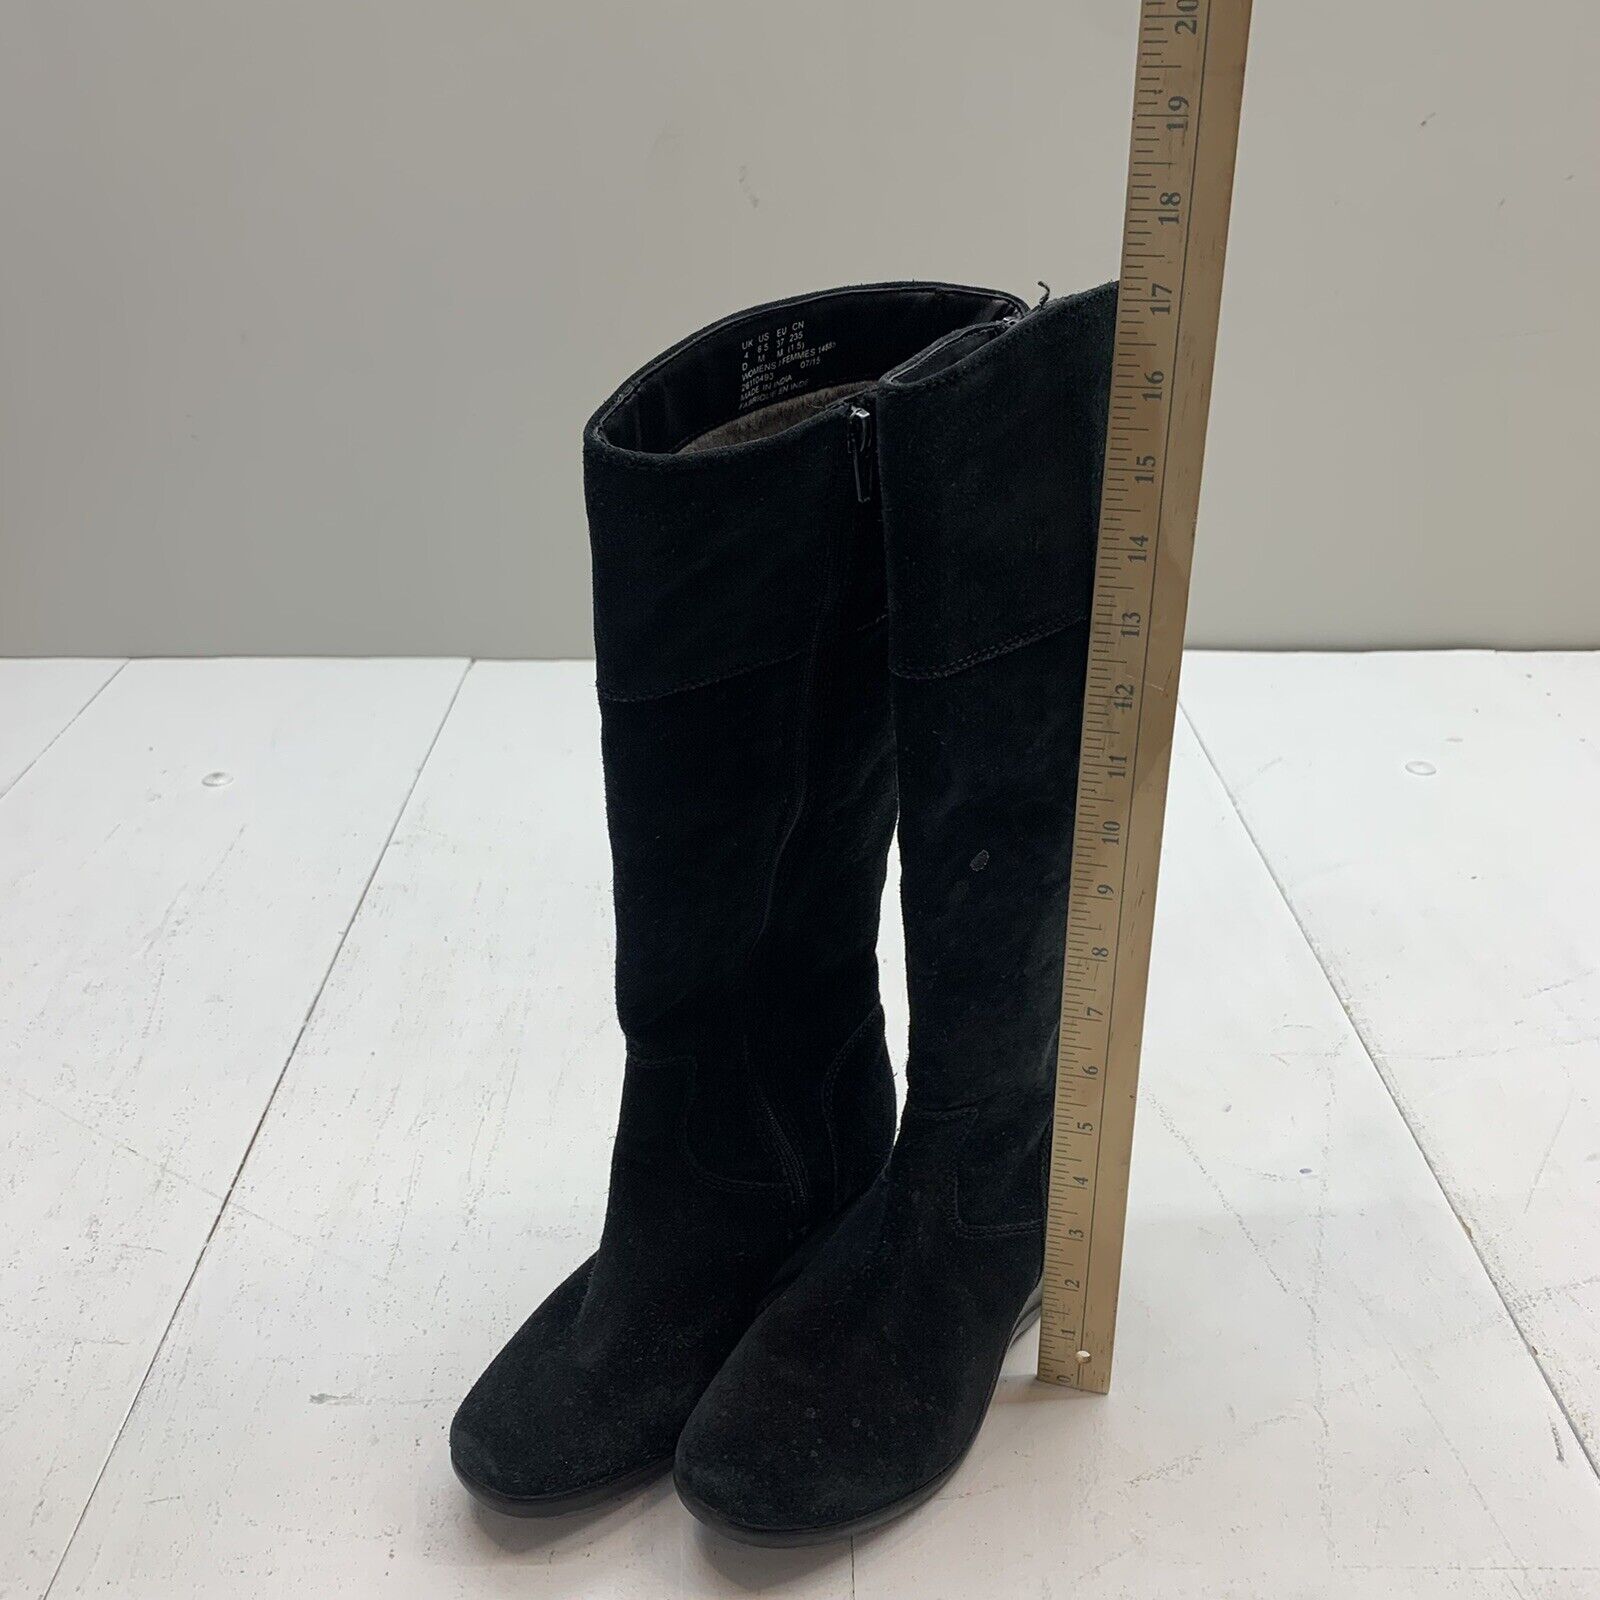 Clarks Tall Wedge Black Suede Boots Size 6.5 - beyond exchange